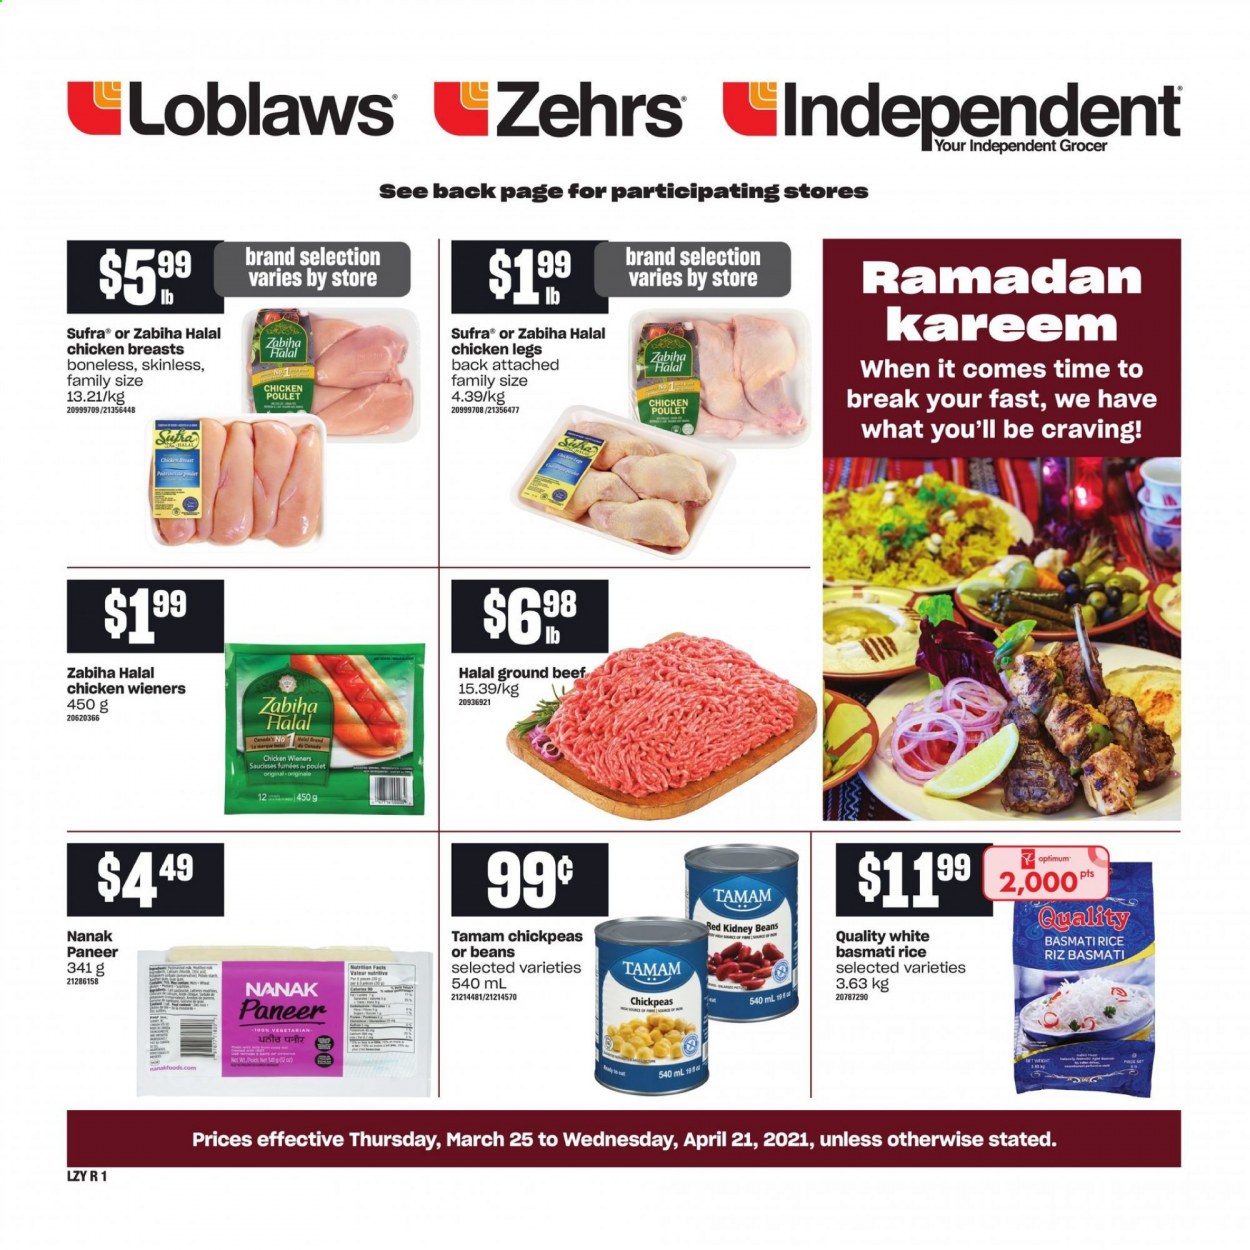 thumbnail - Loblaws Flyer - March 25, 2021 - April 21, 2021 - Sales products - beans, paneer, kidney beans, basmati rice, rice, chickpeas, chicken breasts, chicken legs, chicken, beef meat, ground beef, Optimum. Page 1.